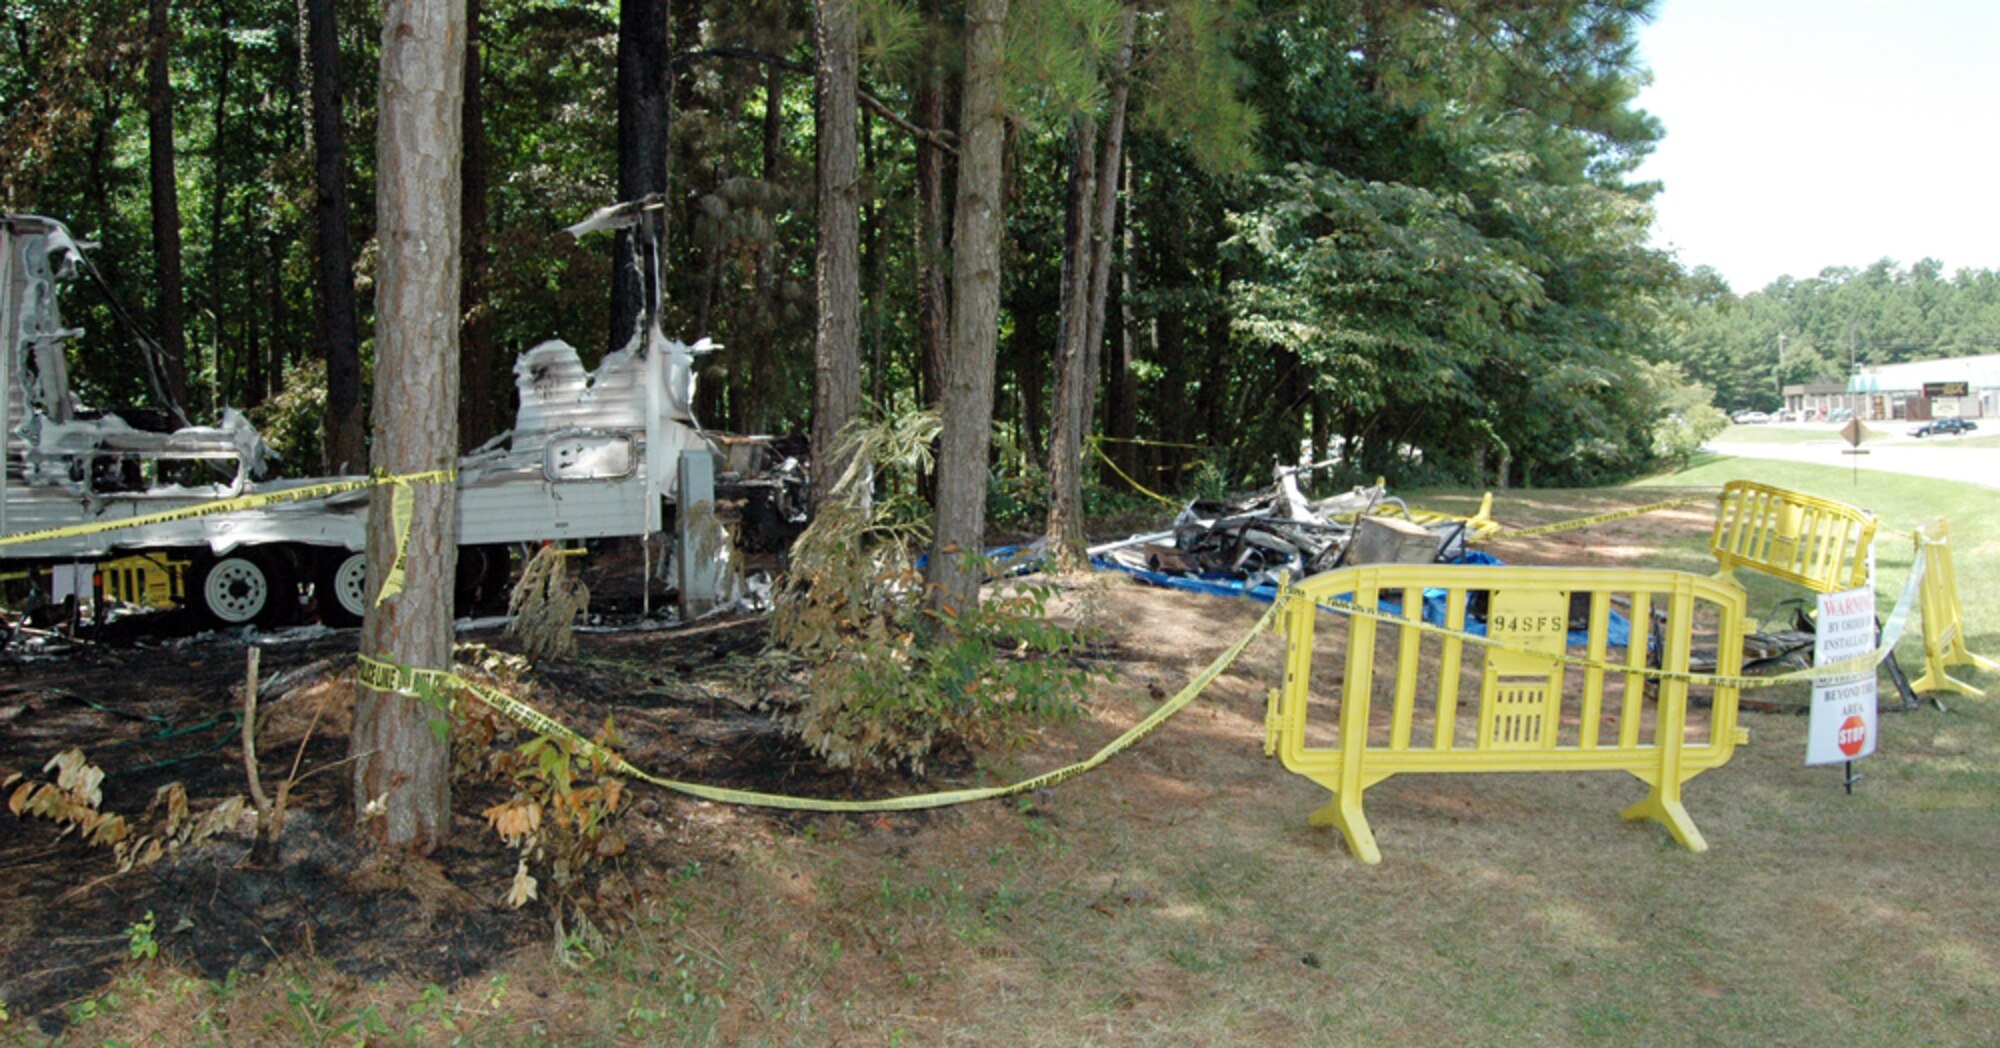 The cordoned area around a recreational trailer that caught on fire around 2:30 a.m. July 17. Nearly a dozen firefighters extinguished the blaze, which caused $30,000 in damages. The cause is currently under investigation. (U.S. Air Force photo/Travon Dennis)